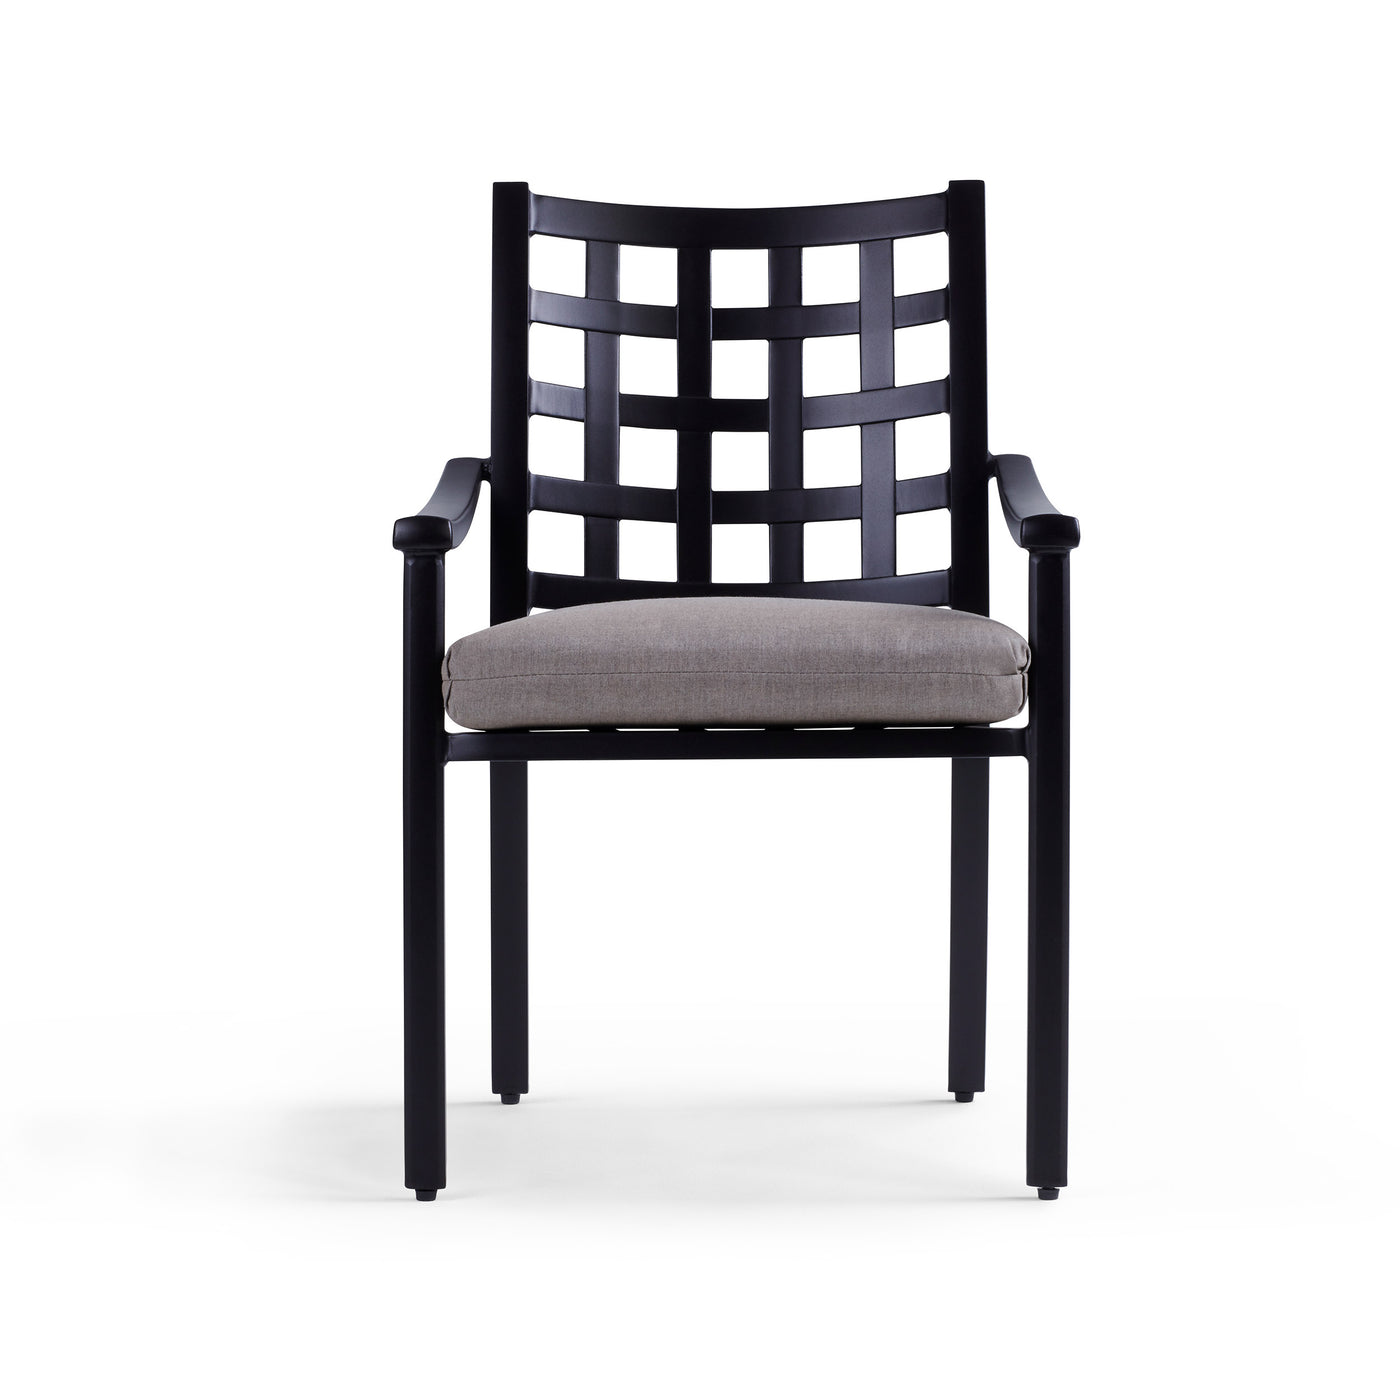  Yardbird Lily Outdoor Dining Arm Chair Outdoor Furniture